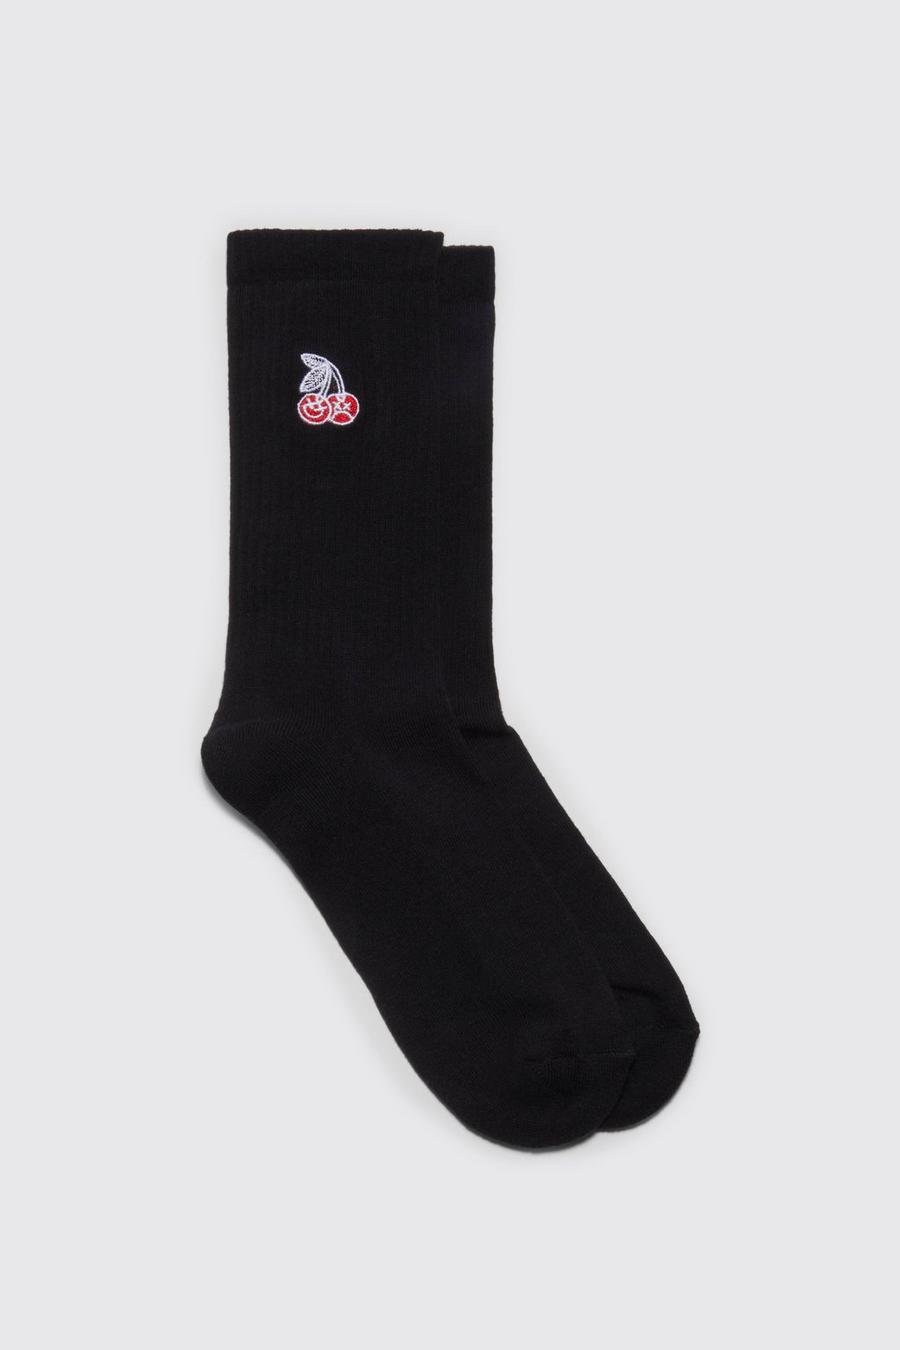 Black Cherry Embroidered Sports Socks image number 1